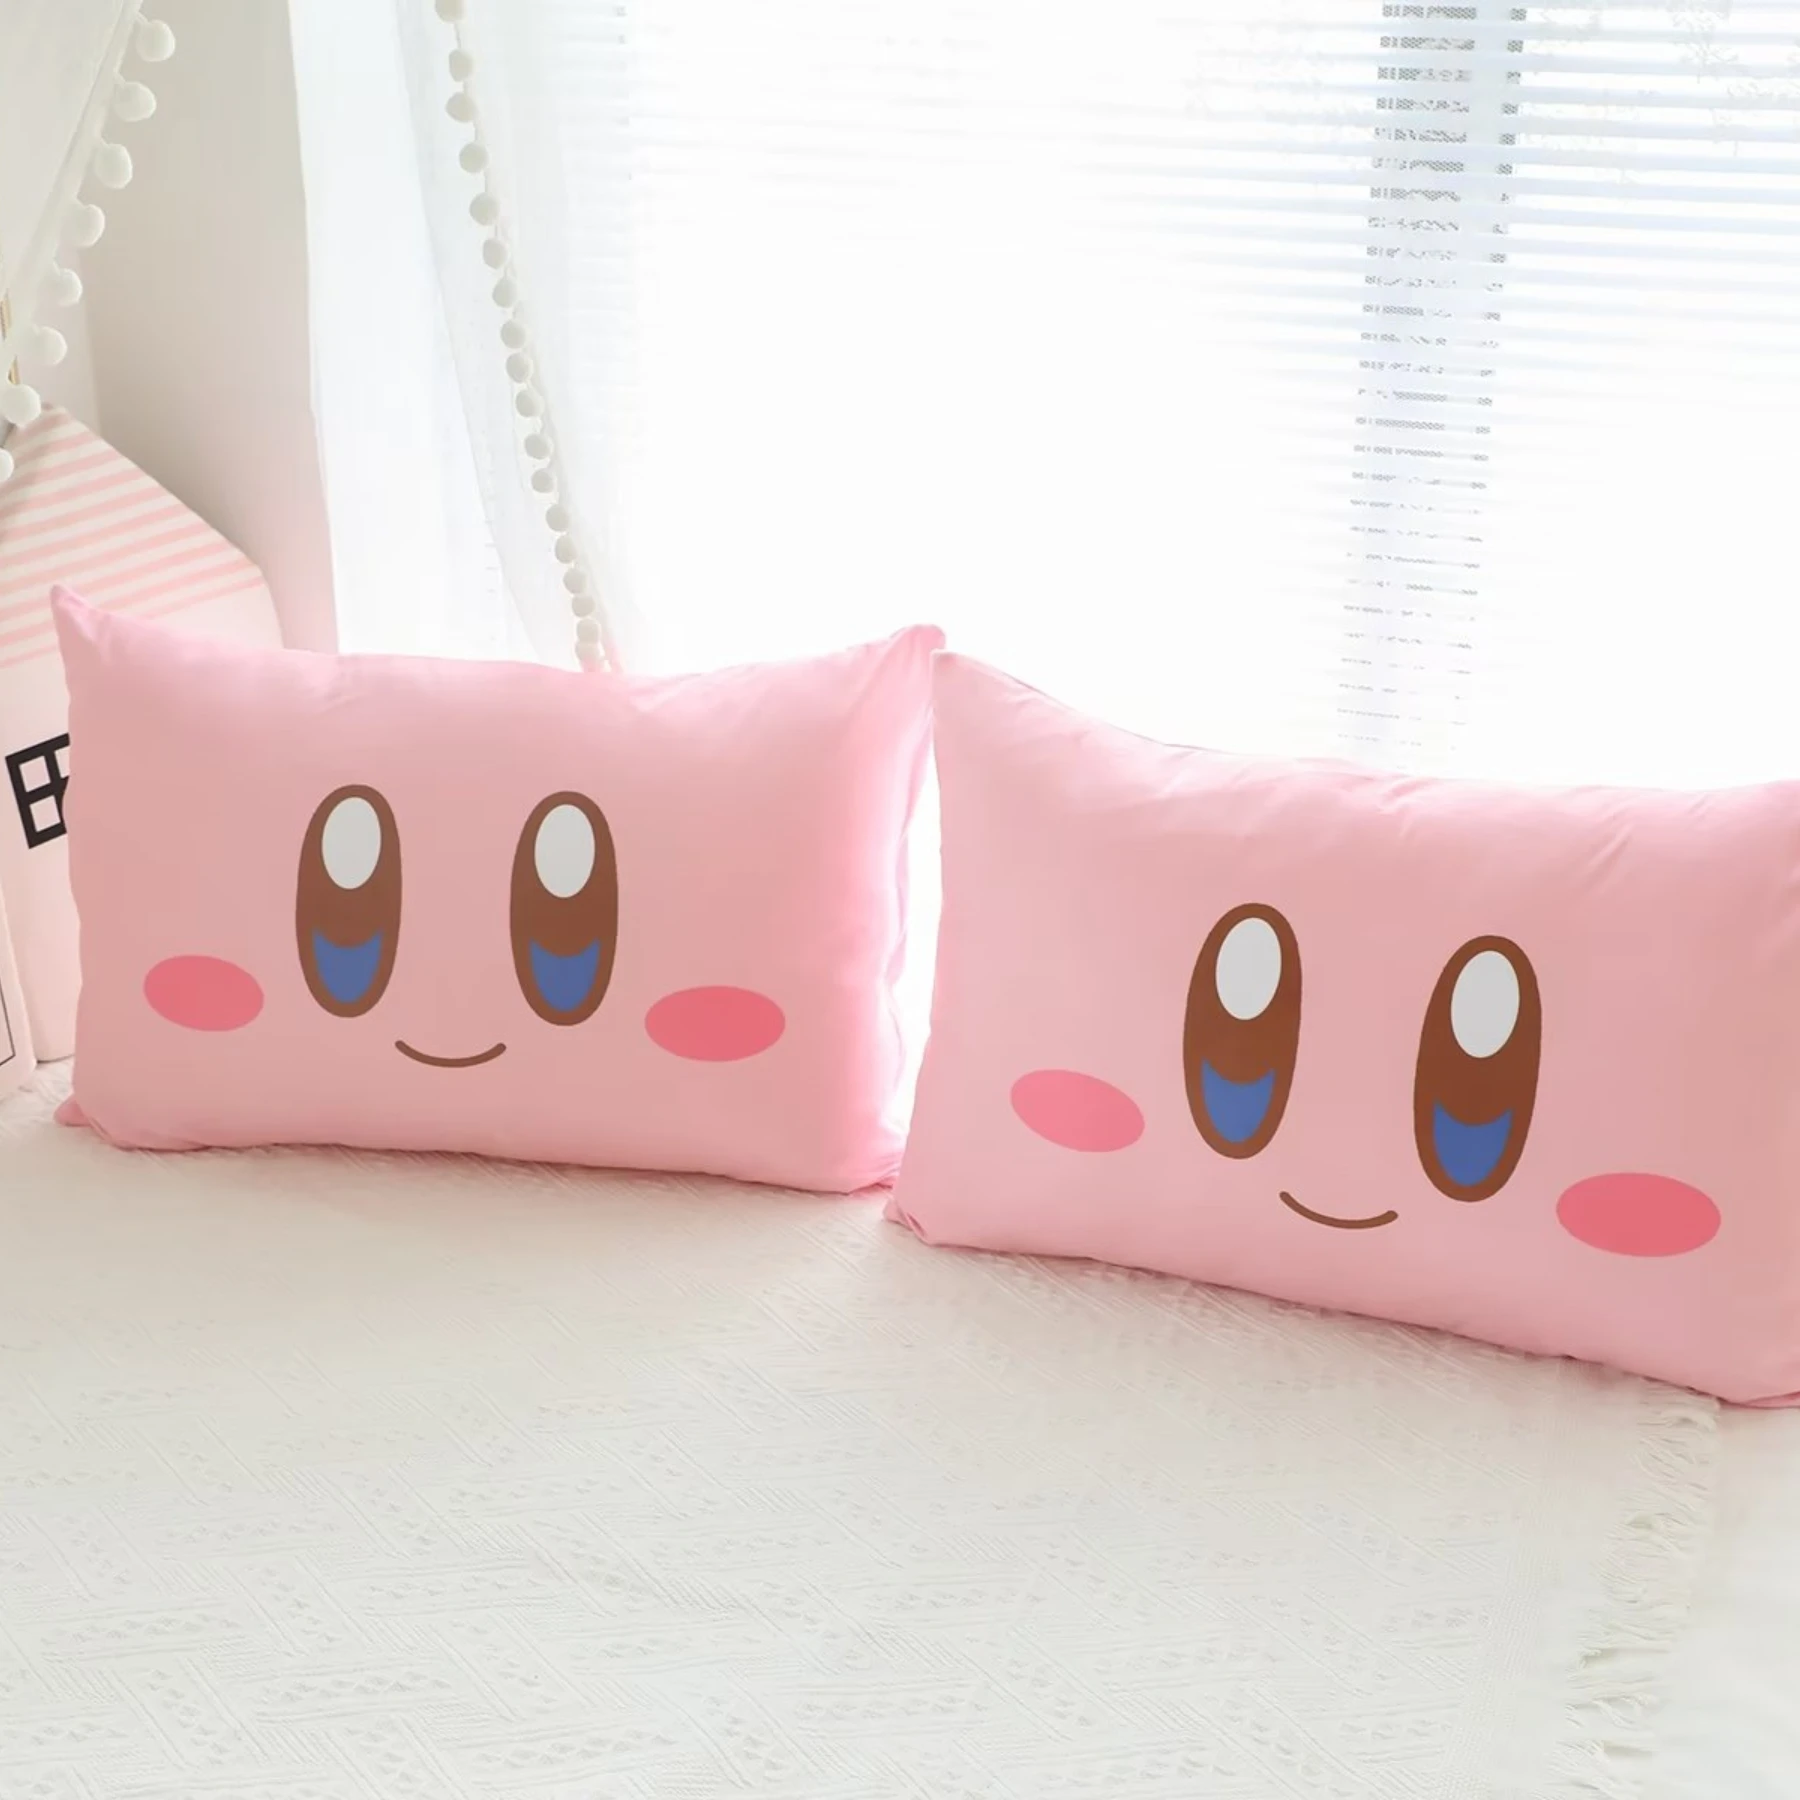 Cute Kirby Pillowcase Lovely Japanese Style Anime Double Sided Printing Pink Kirby Pillow Cover Home Decor 5 - Kirby Plush